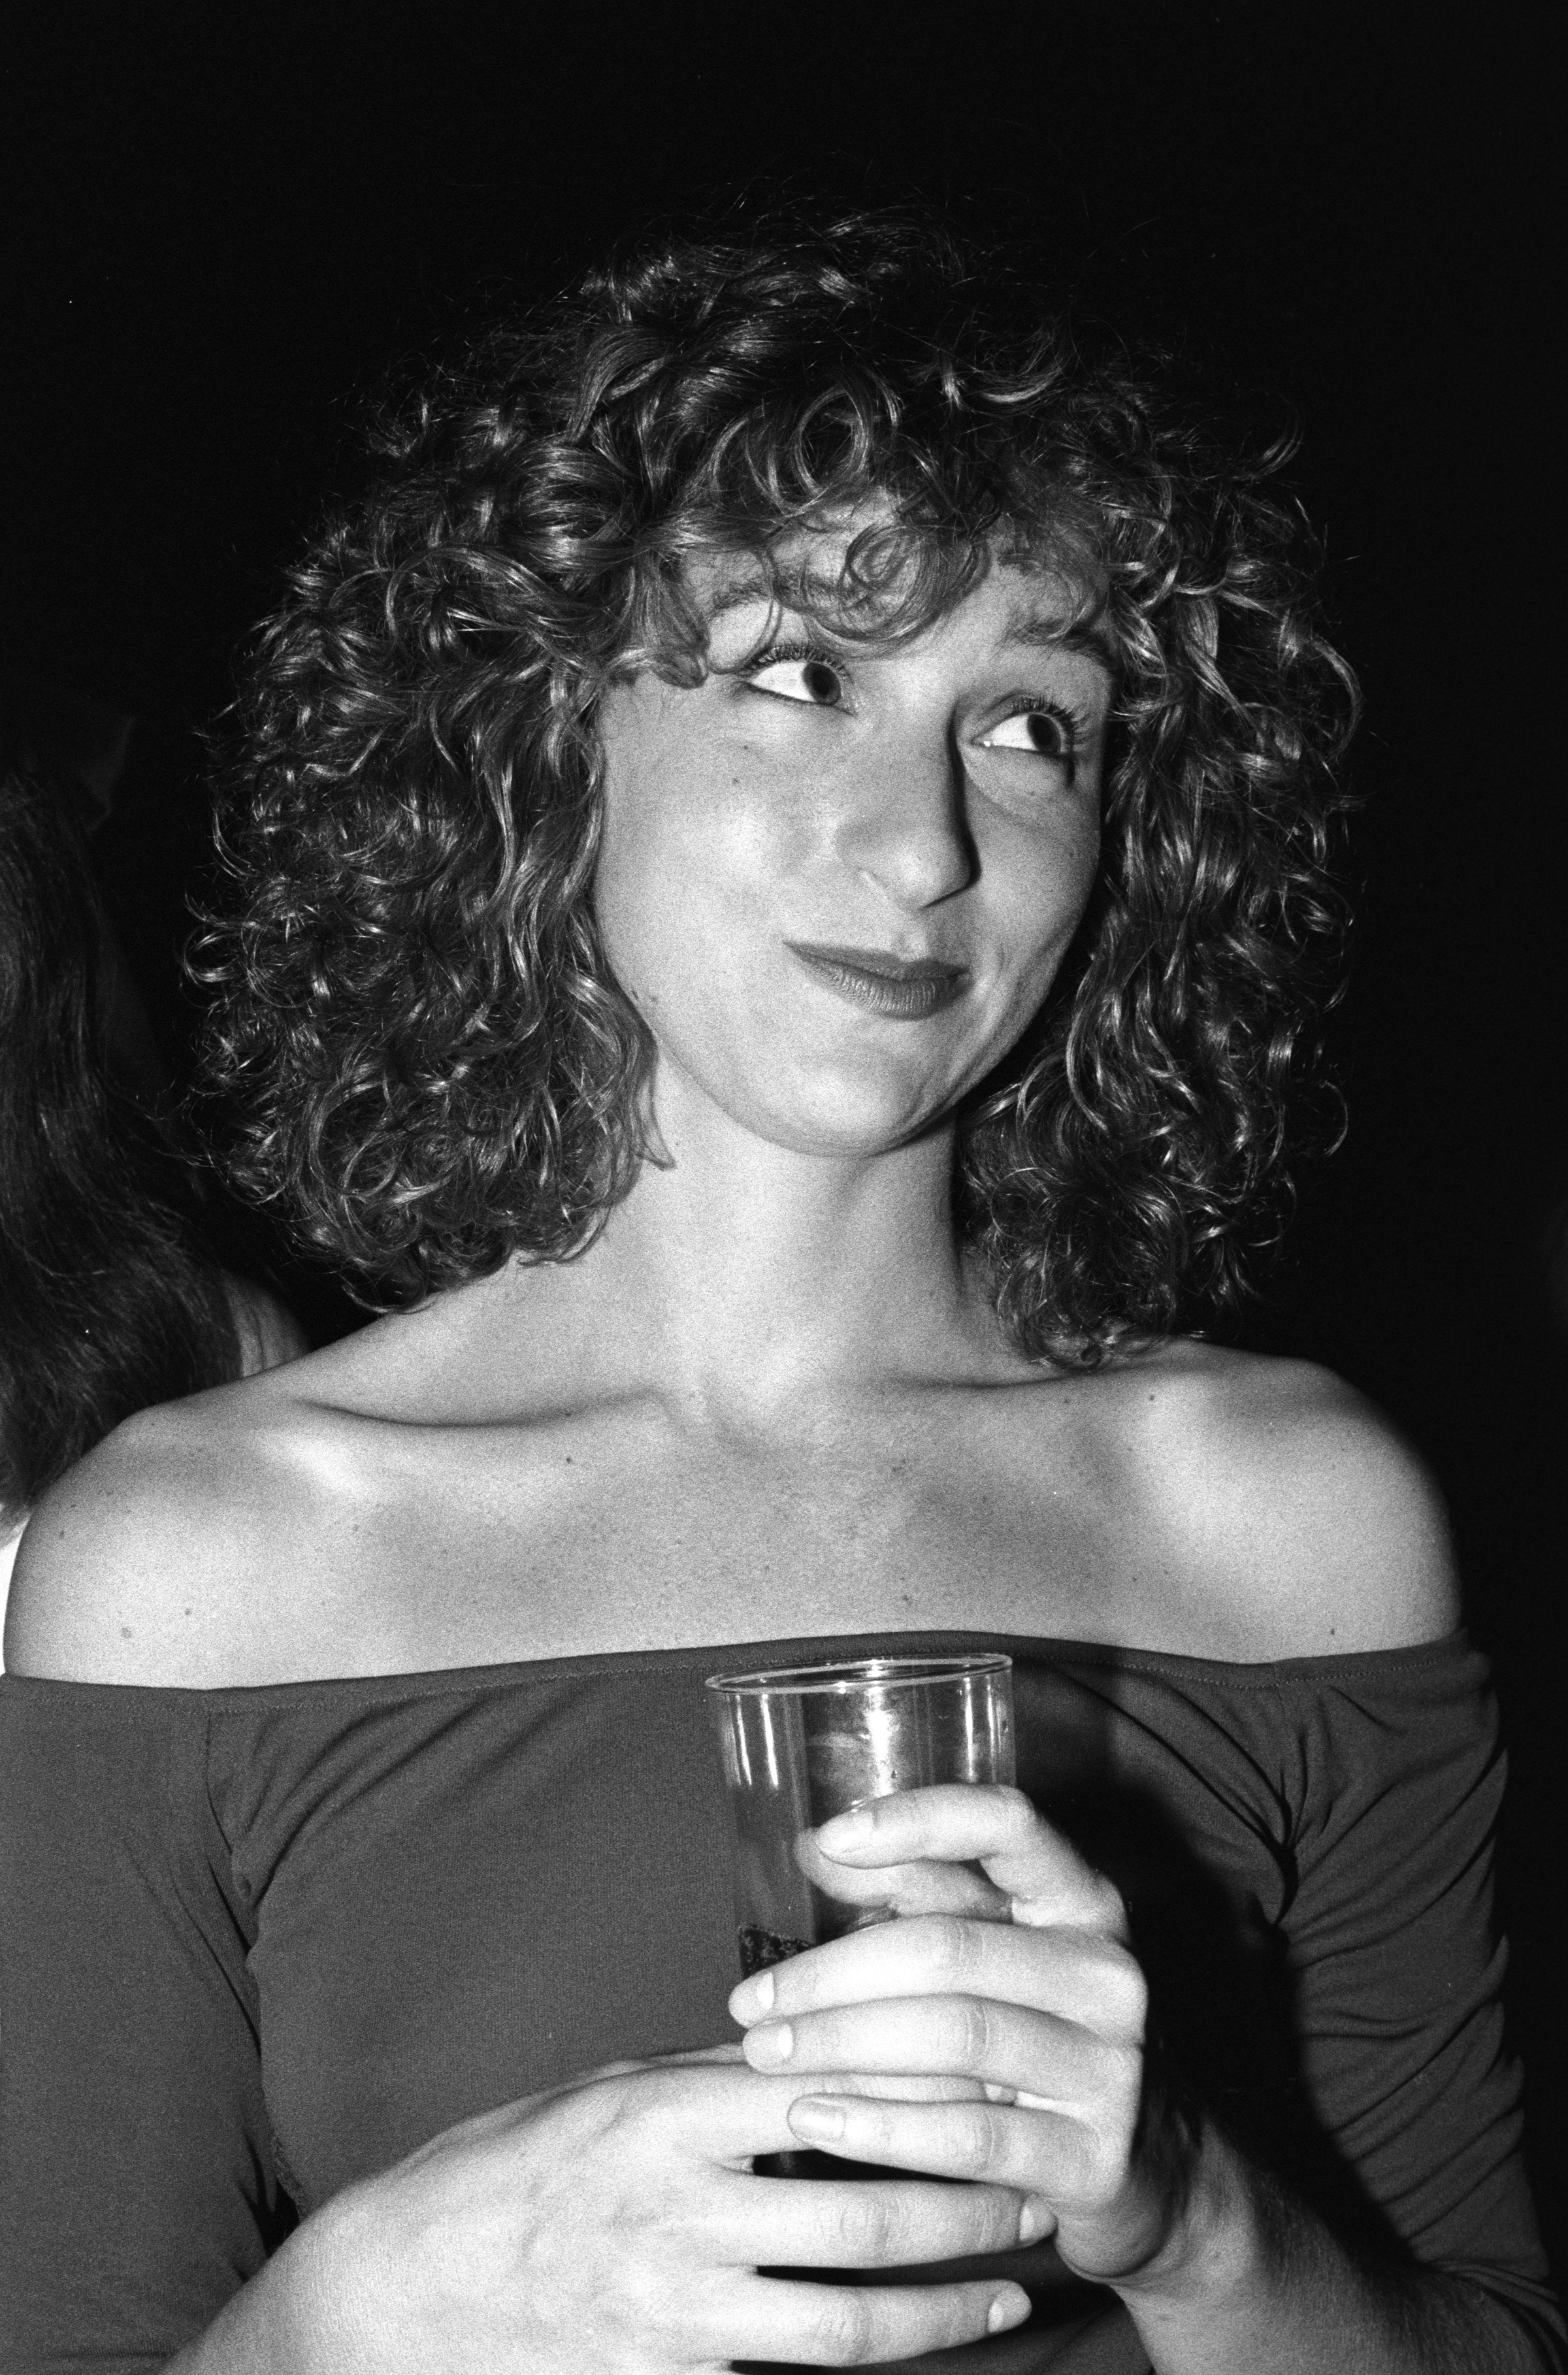 Jennifer Grey poses for a photo at a party for the premiere of her film "Dirty Dancing" in New York City, in August 1987. | Source: Getty Images